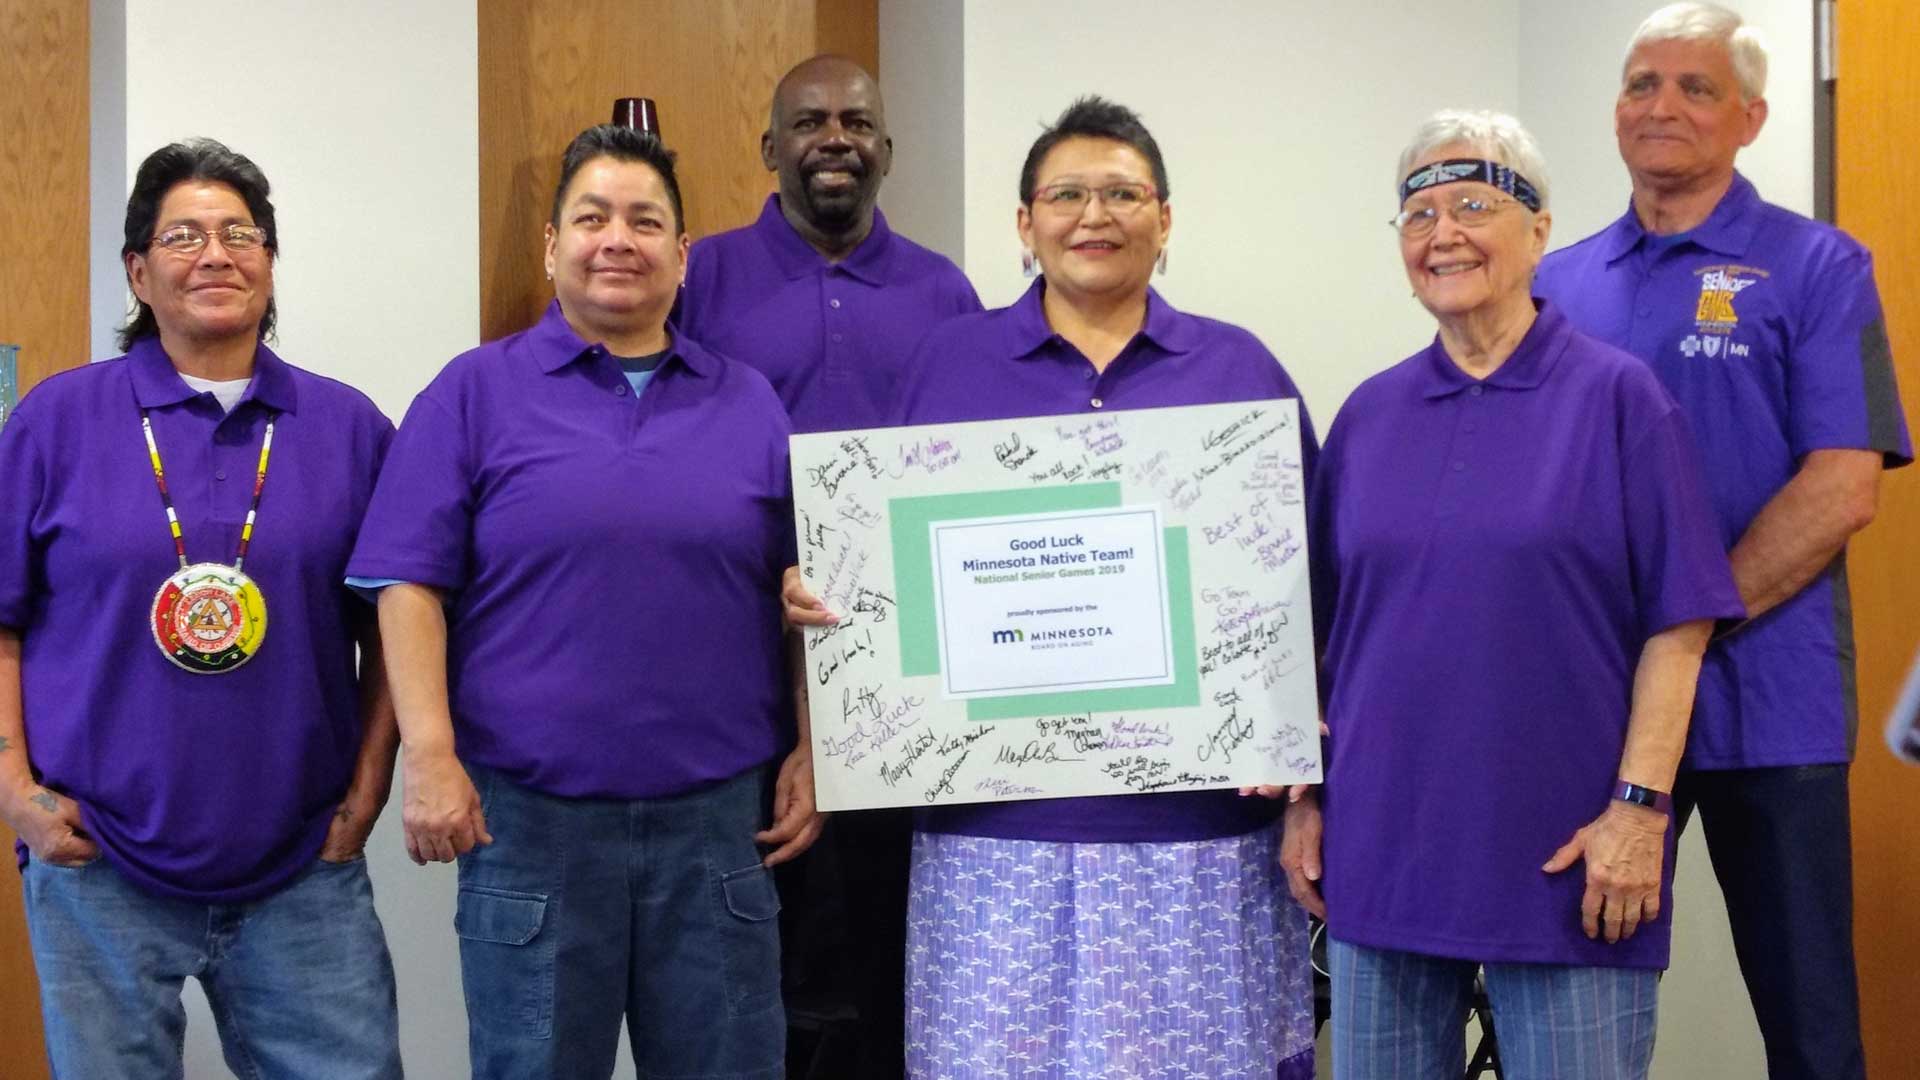 A picture of 6 people standing together in purple shirts. The person in the middle is holding a sign that reads "Good luck Minnesota Native Team! National Senior Games 2019." The sign has many handwritten notes on it.